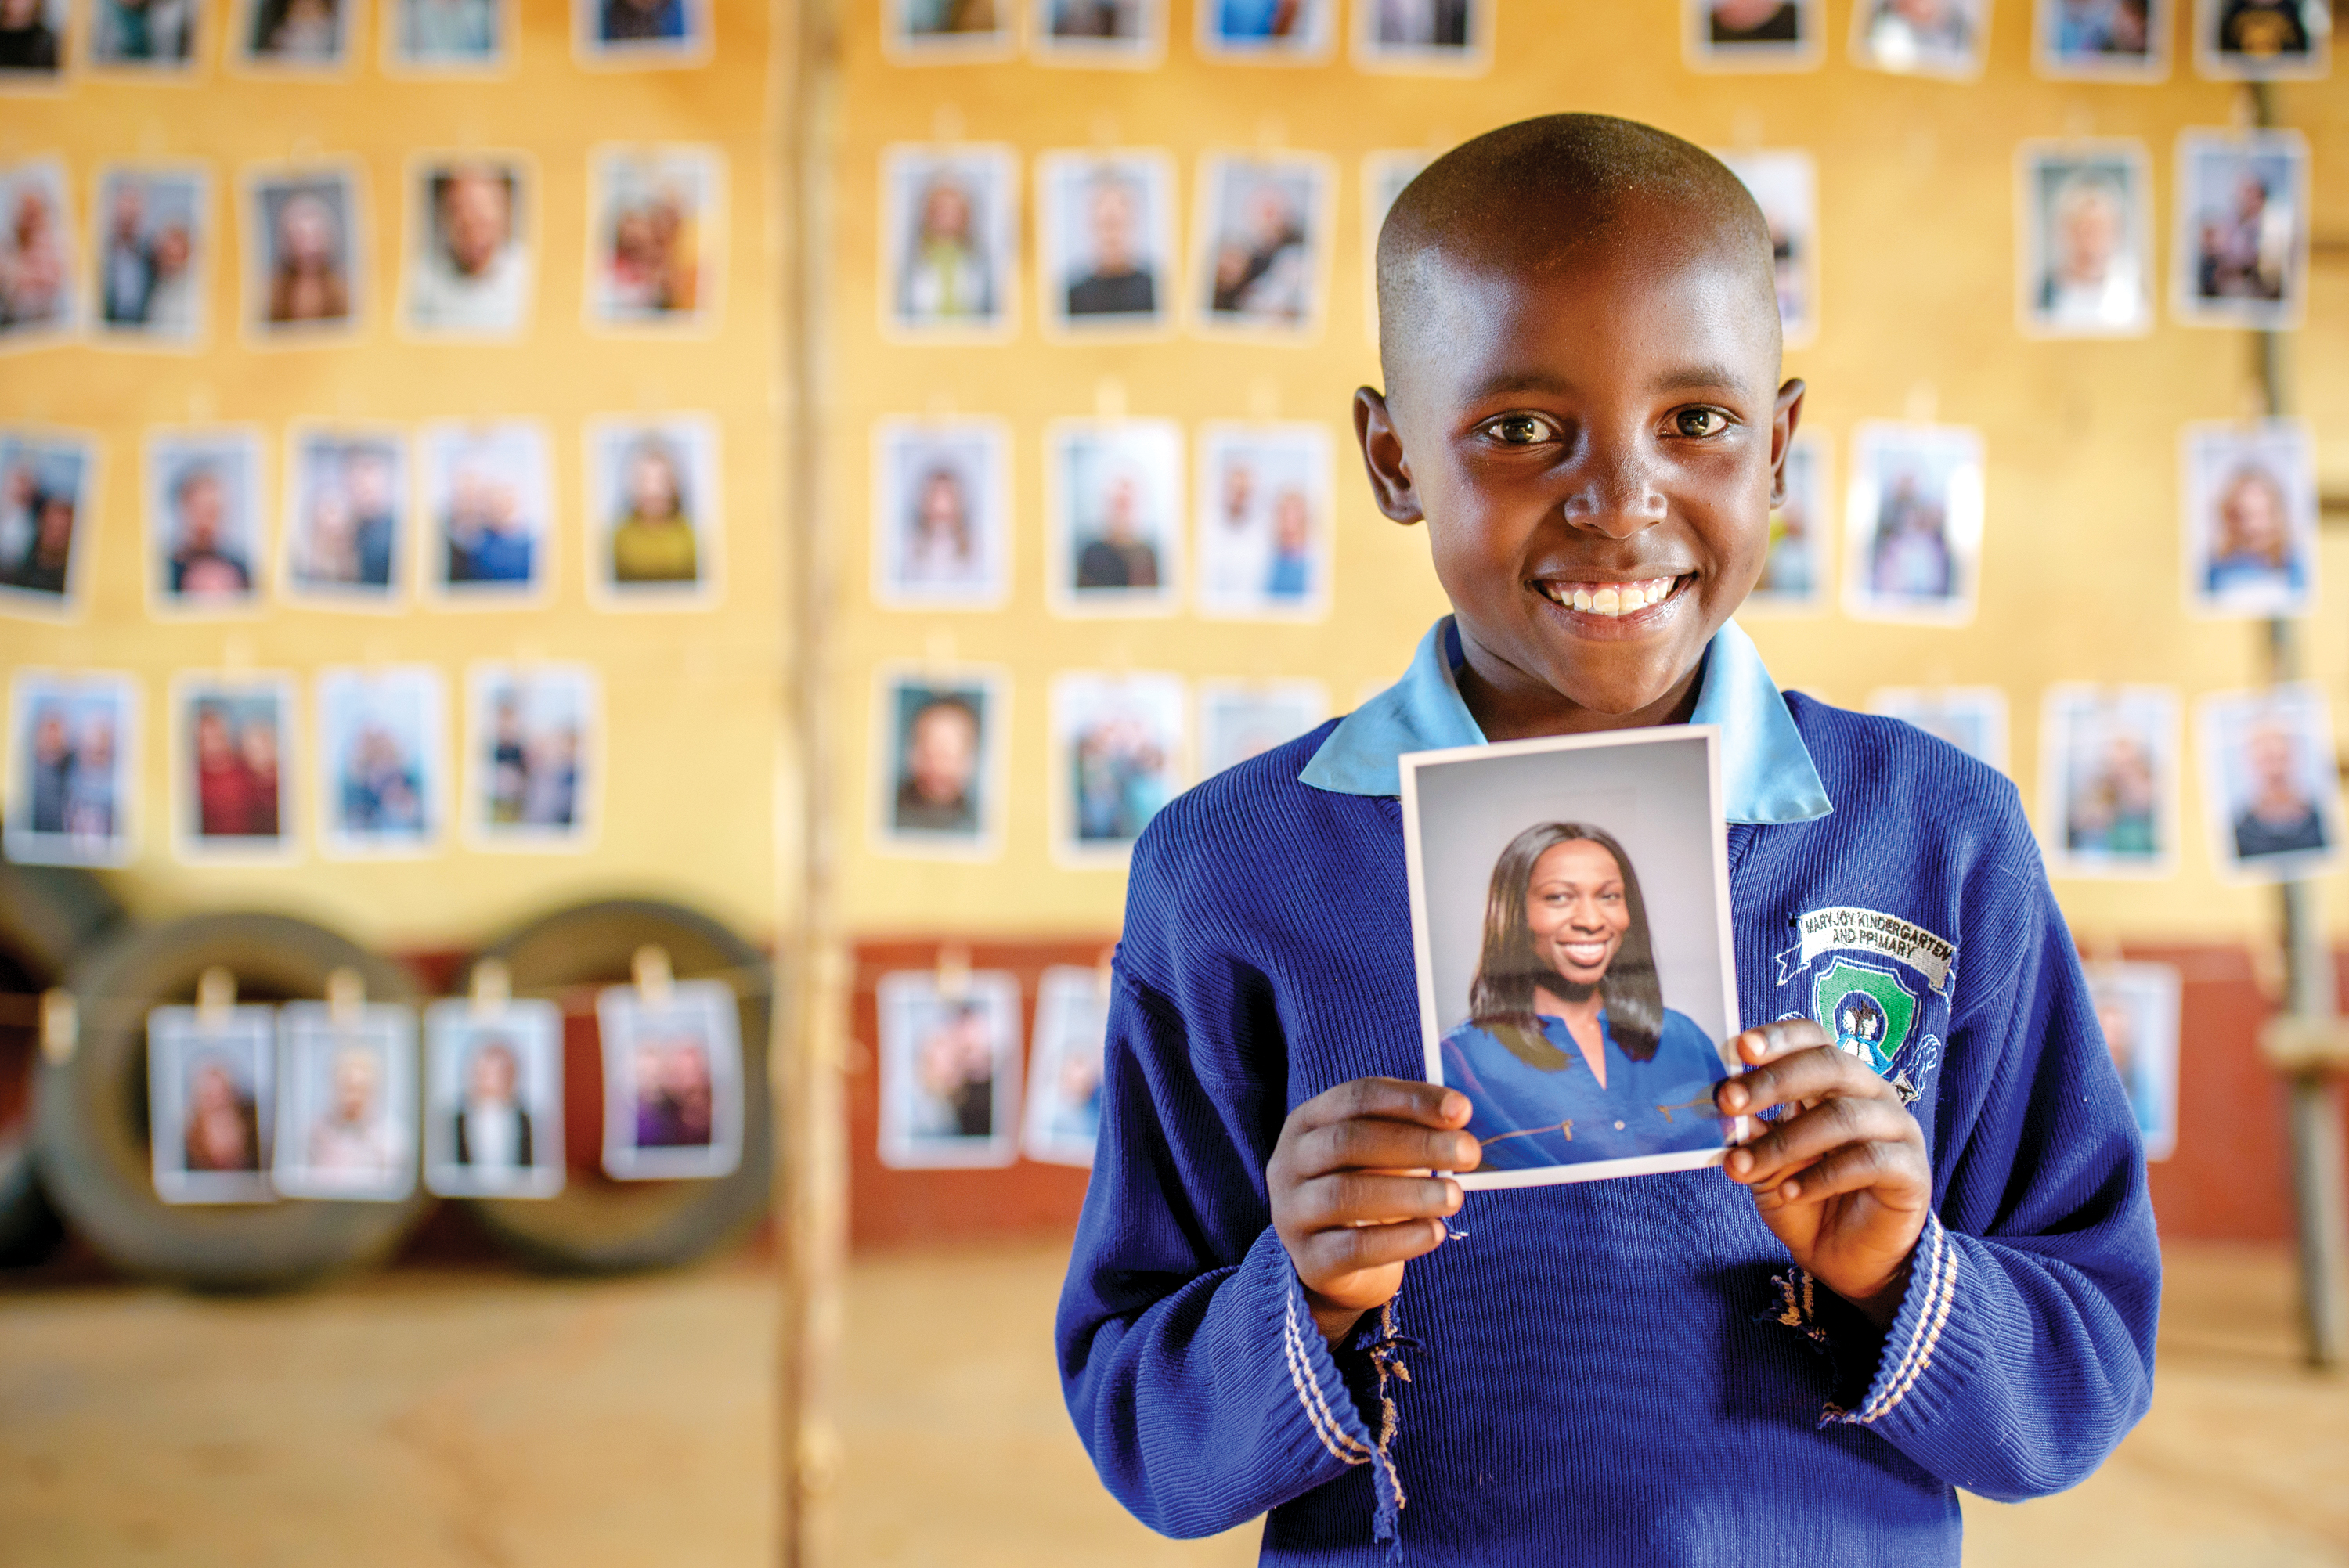 Mary from Kenya smiles and holds up a photo of the sponsor she has chosen. There are rows of photos of other sponsors in the background behind her